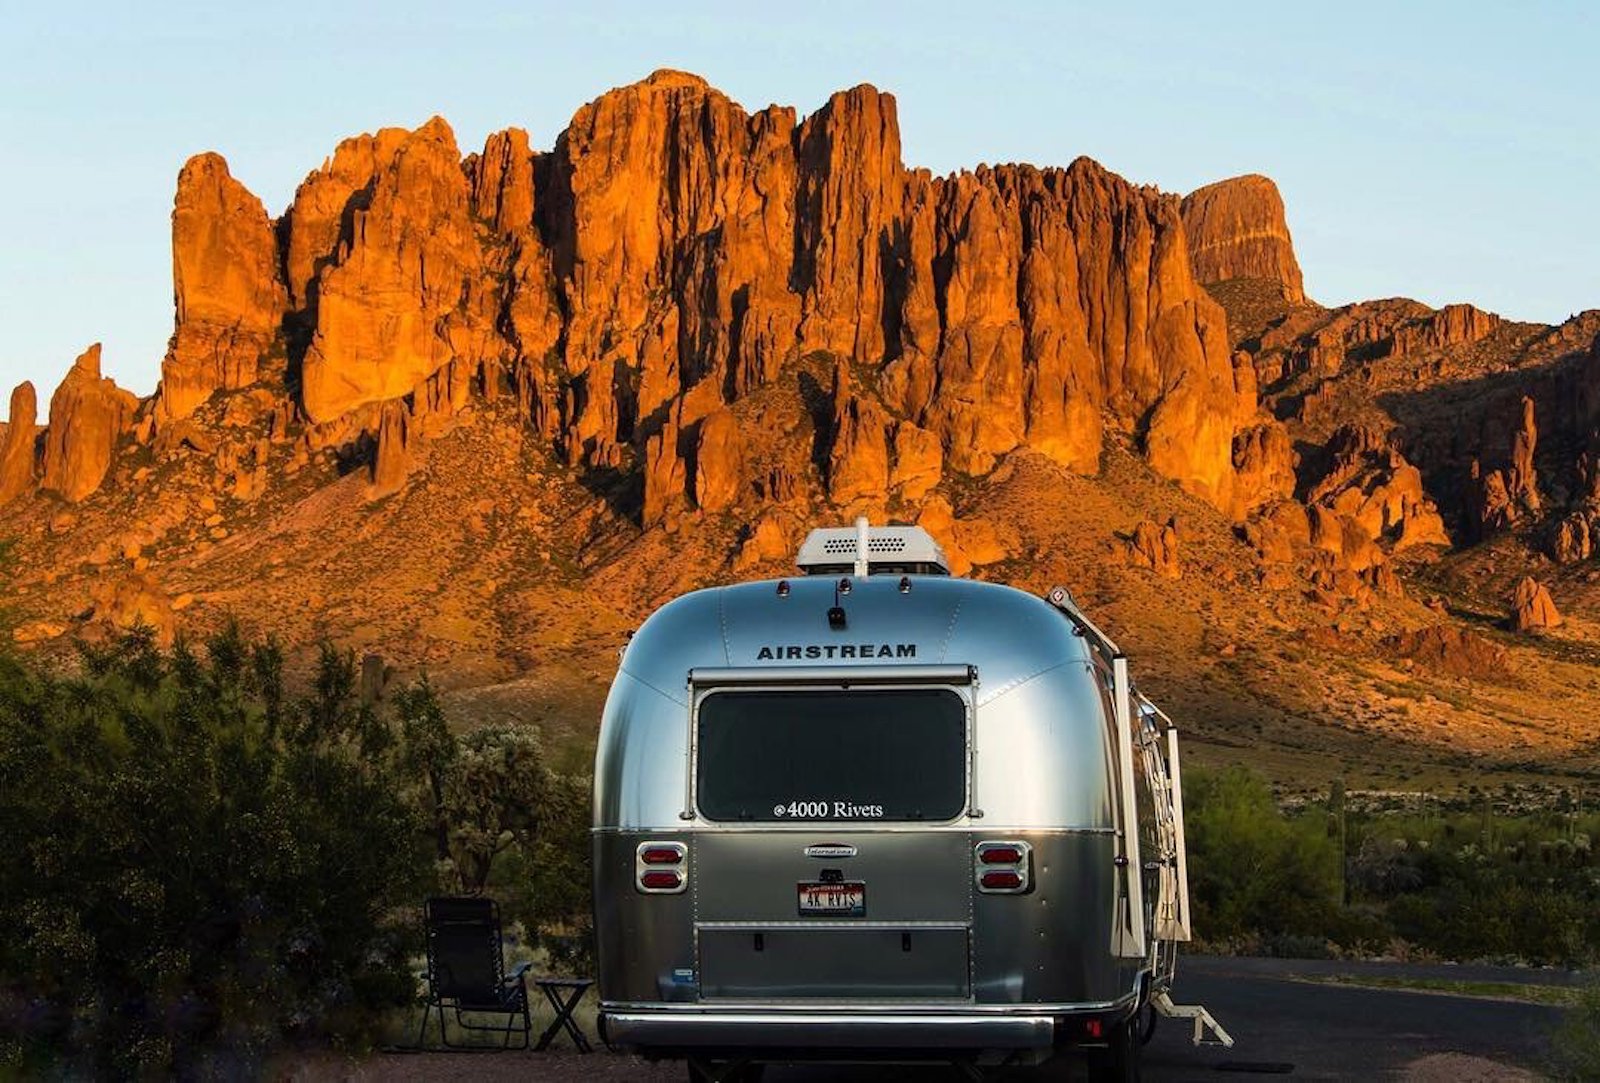 Sunset and Airstream in Lost Dutchman State Park at sunset